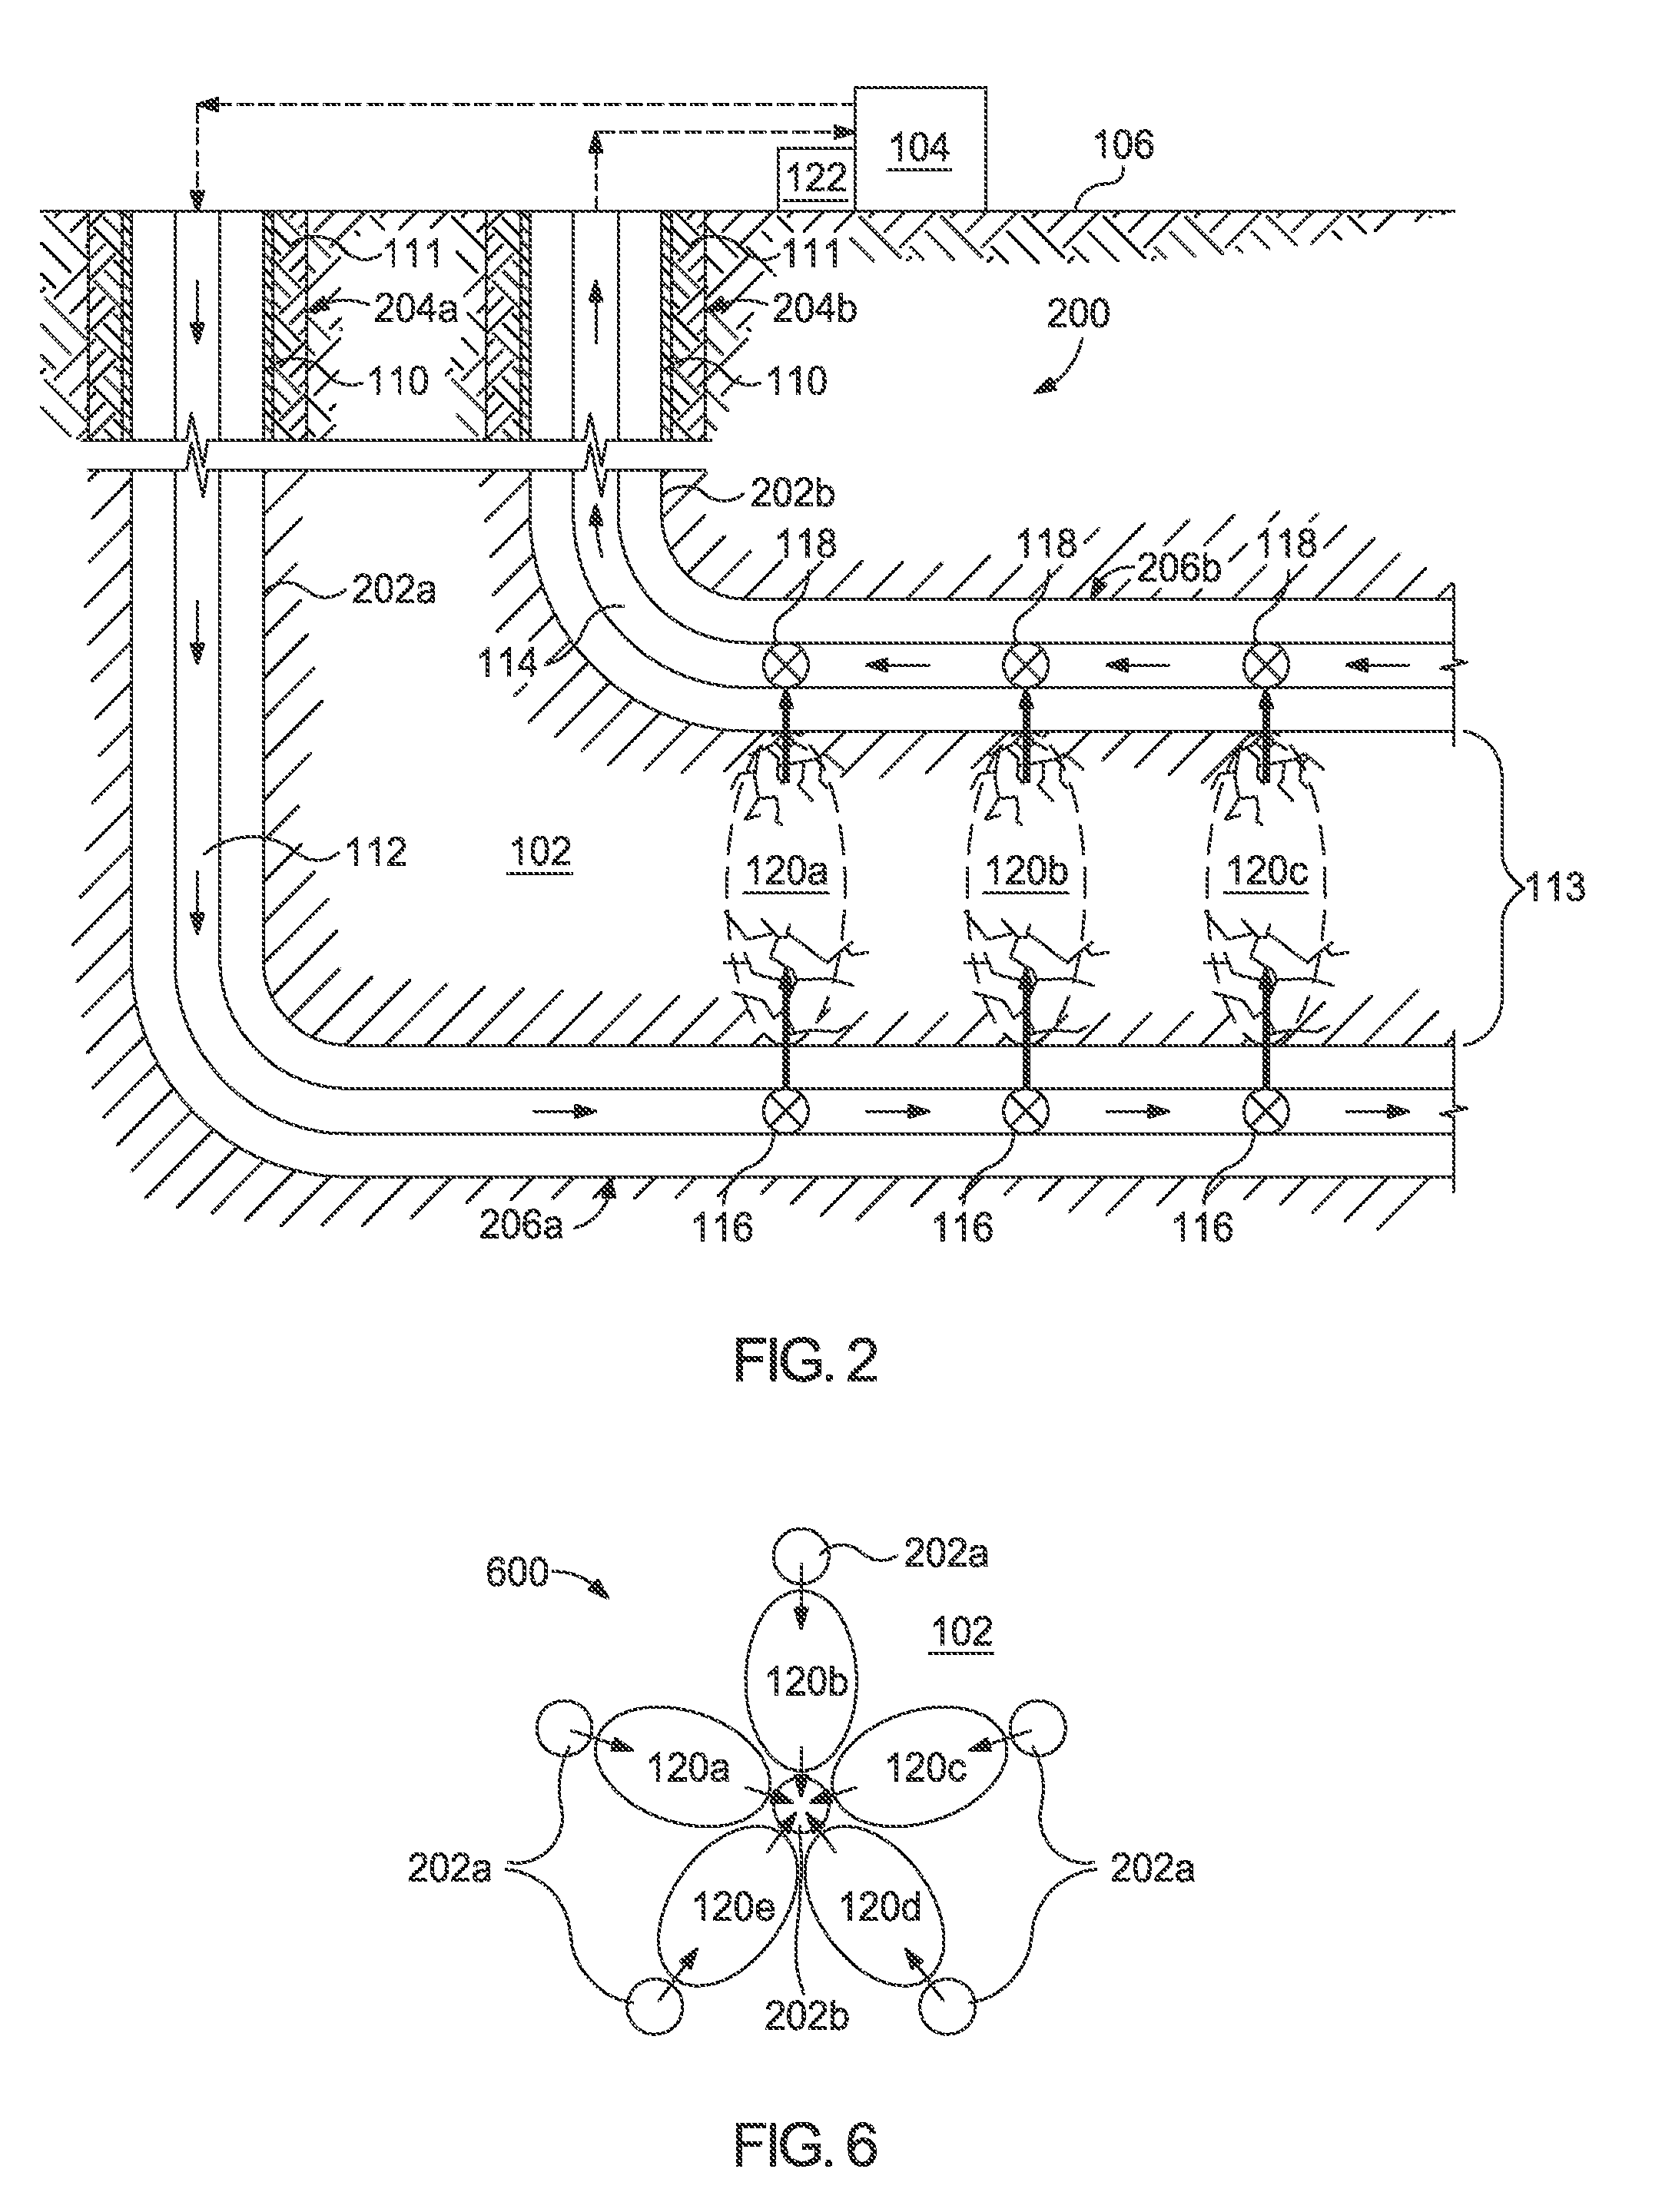 Enhanced Geothermal Systems and Methods